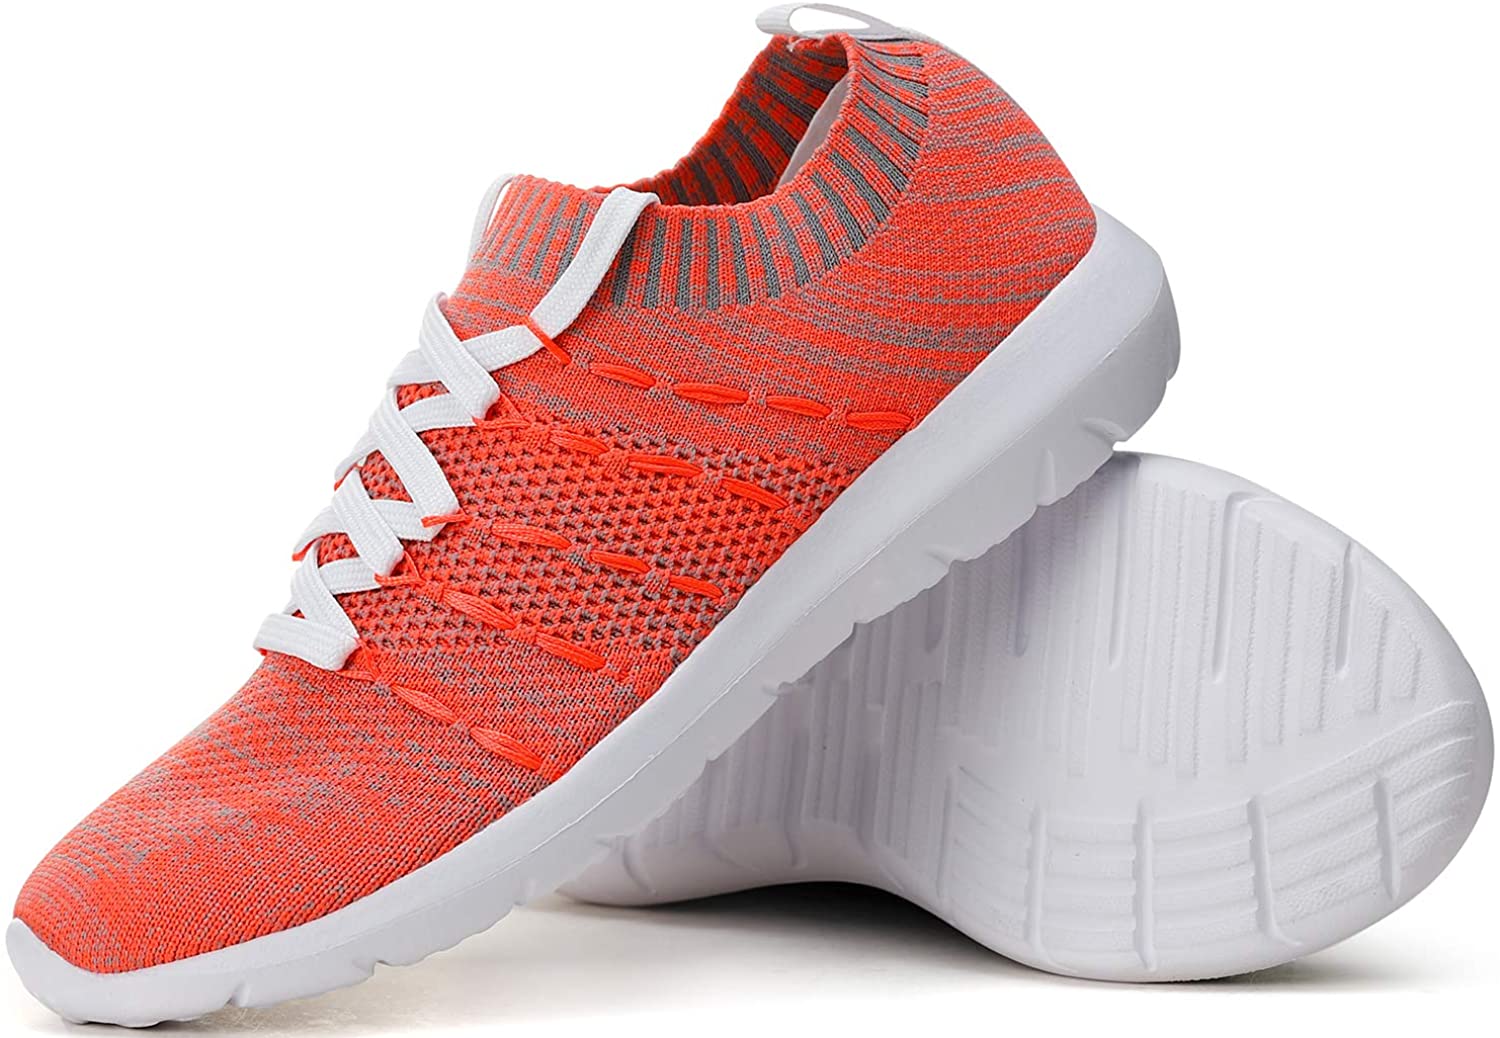 PromArder Womens Walking Shoes Slip On Athletic Running Sneakers Knit Mesh Comfortable Work Shoe 